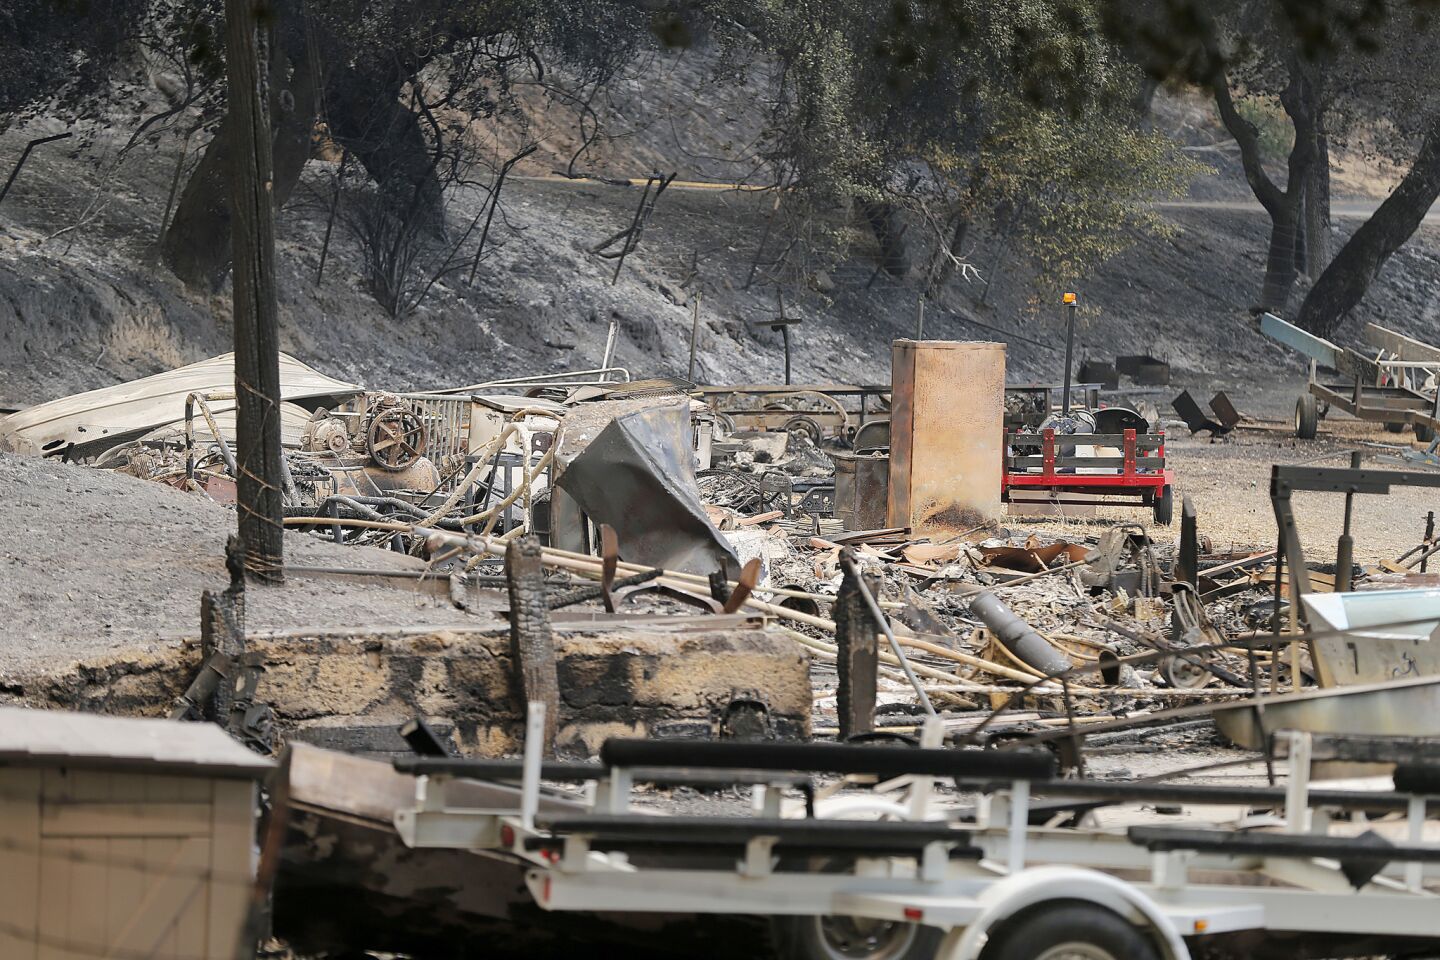 The remains of a structure and boats scorched by the Whittier fire along State Route 154 in the Los Padres National Forest near Lake Cachuma.